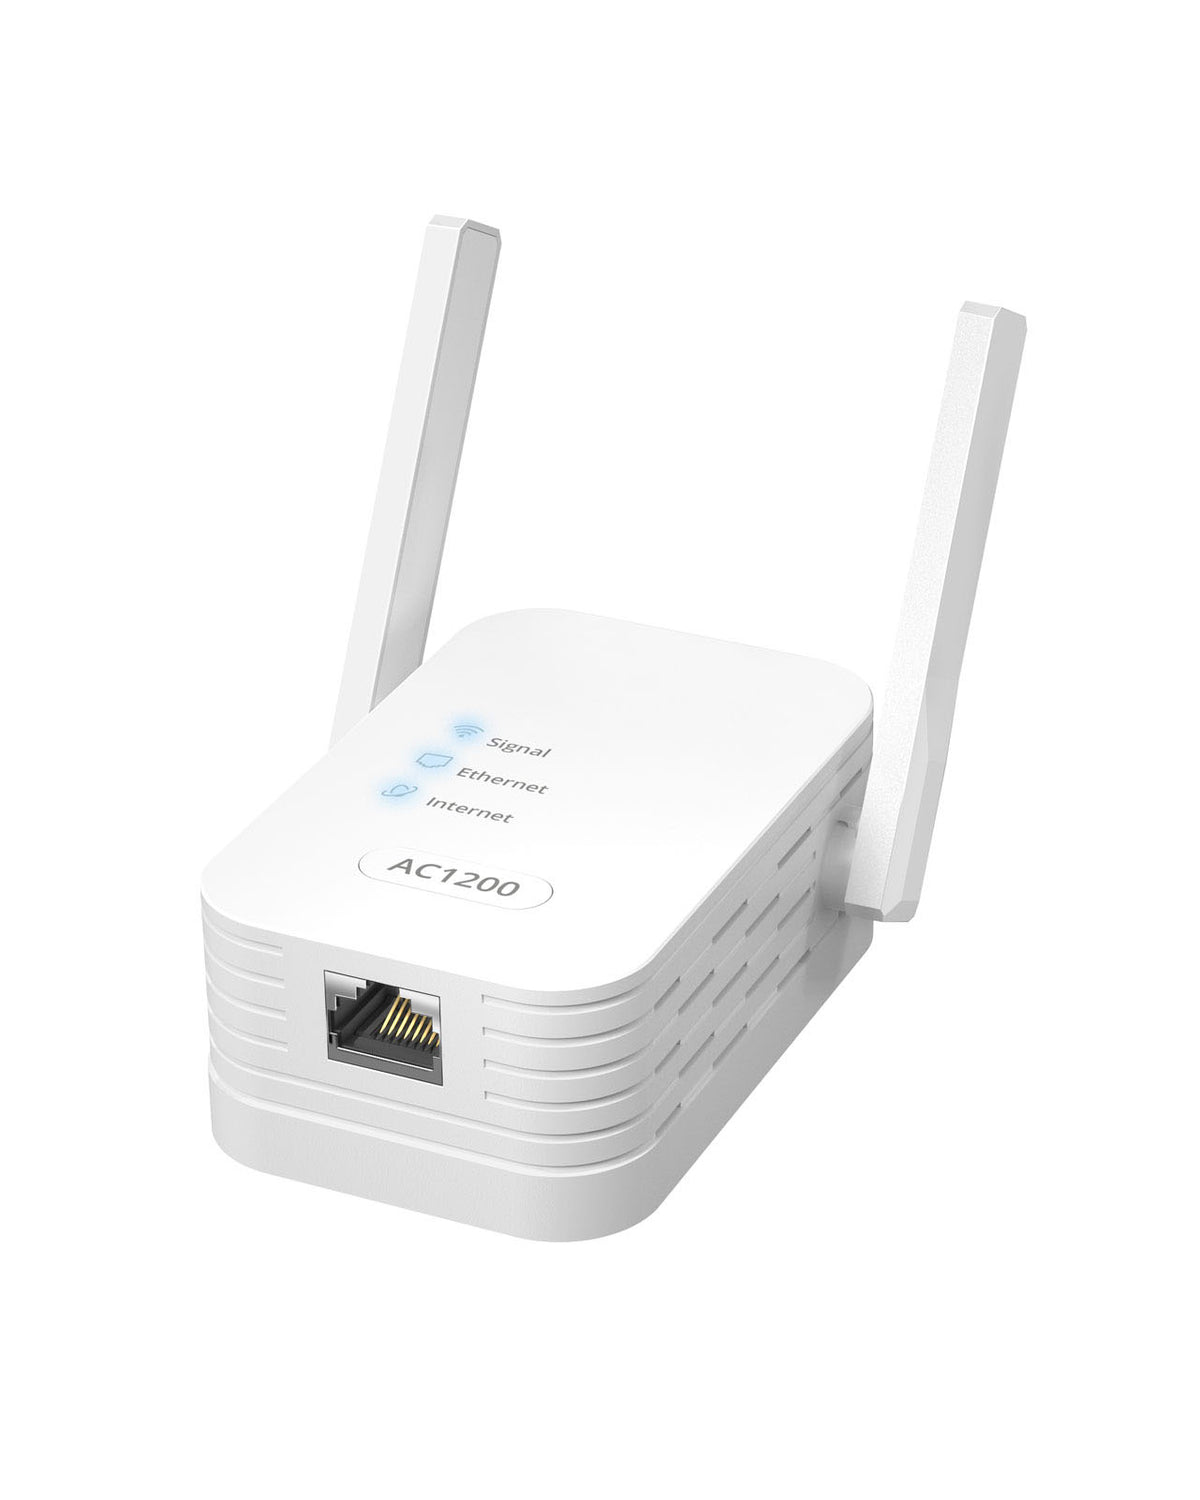 ioGiant AC1200 WiFi to Ethernet Adapter